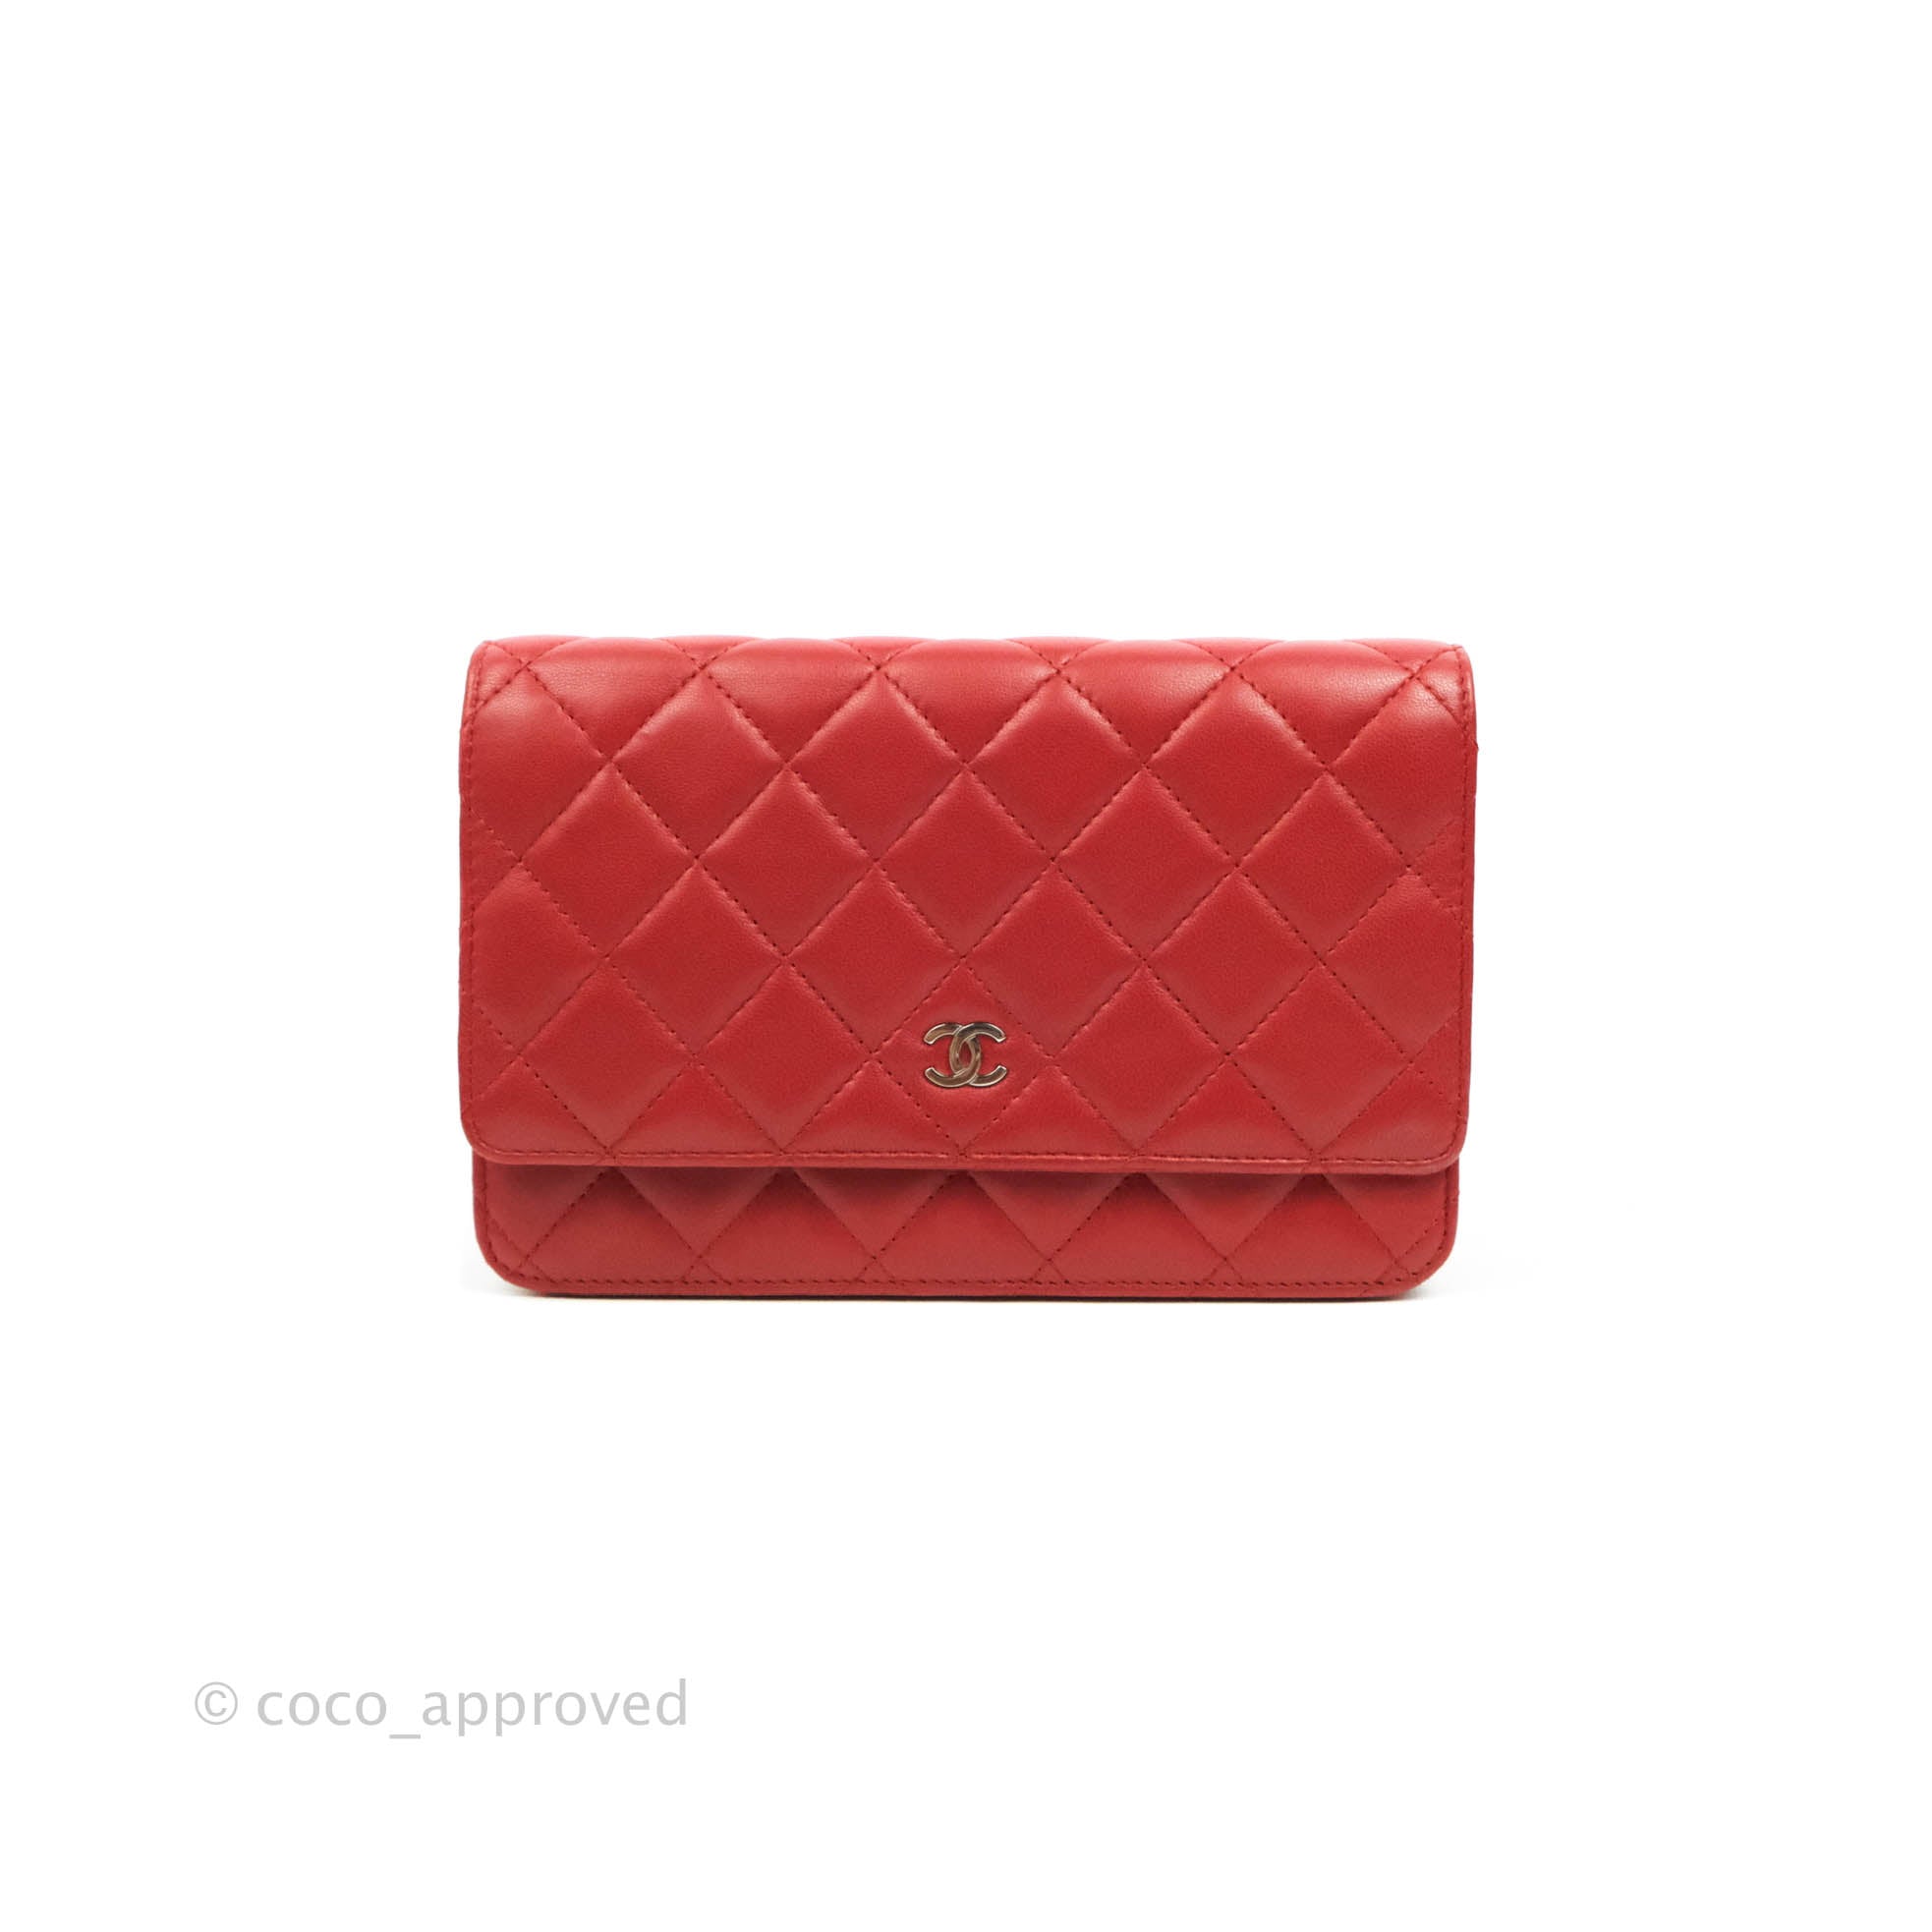 woc chanel red